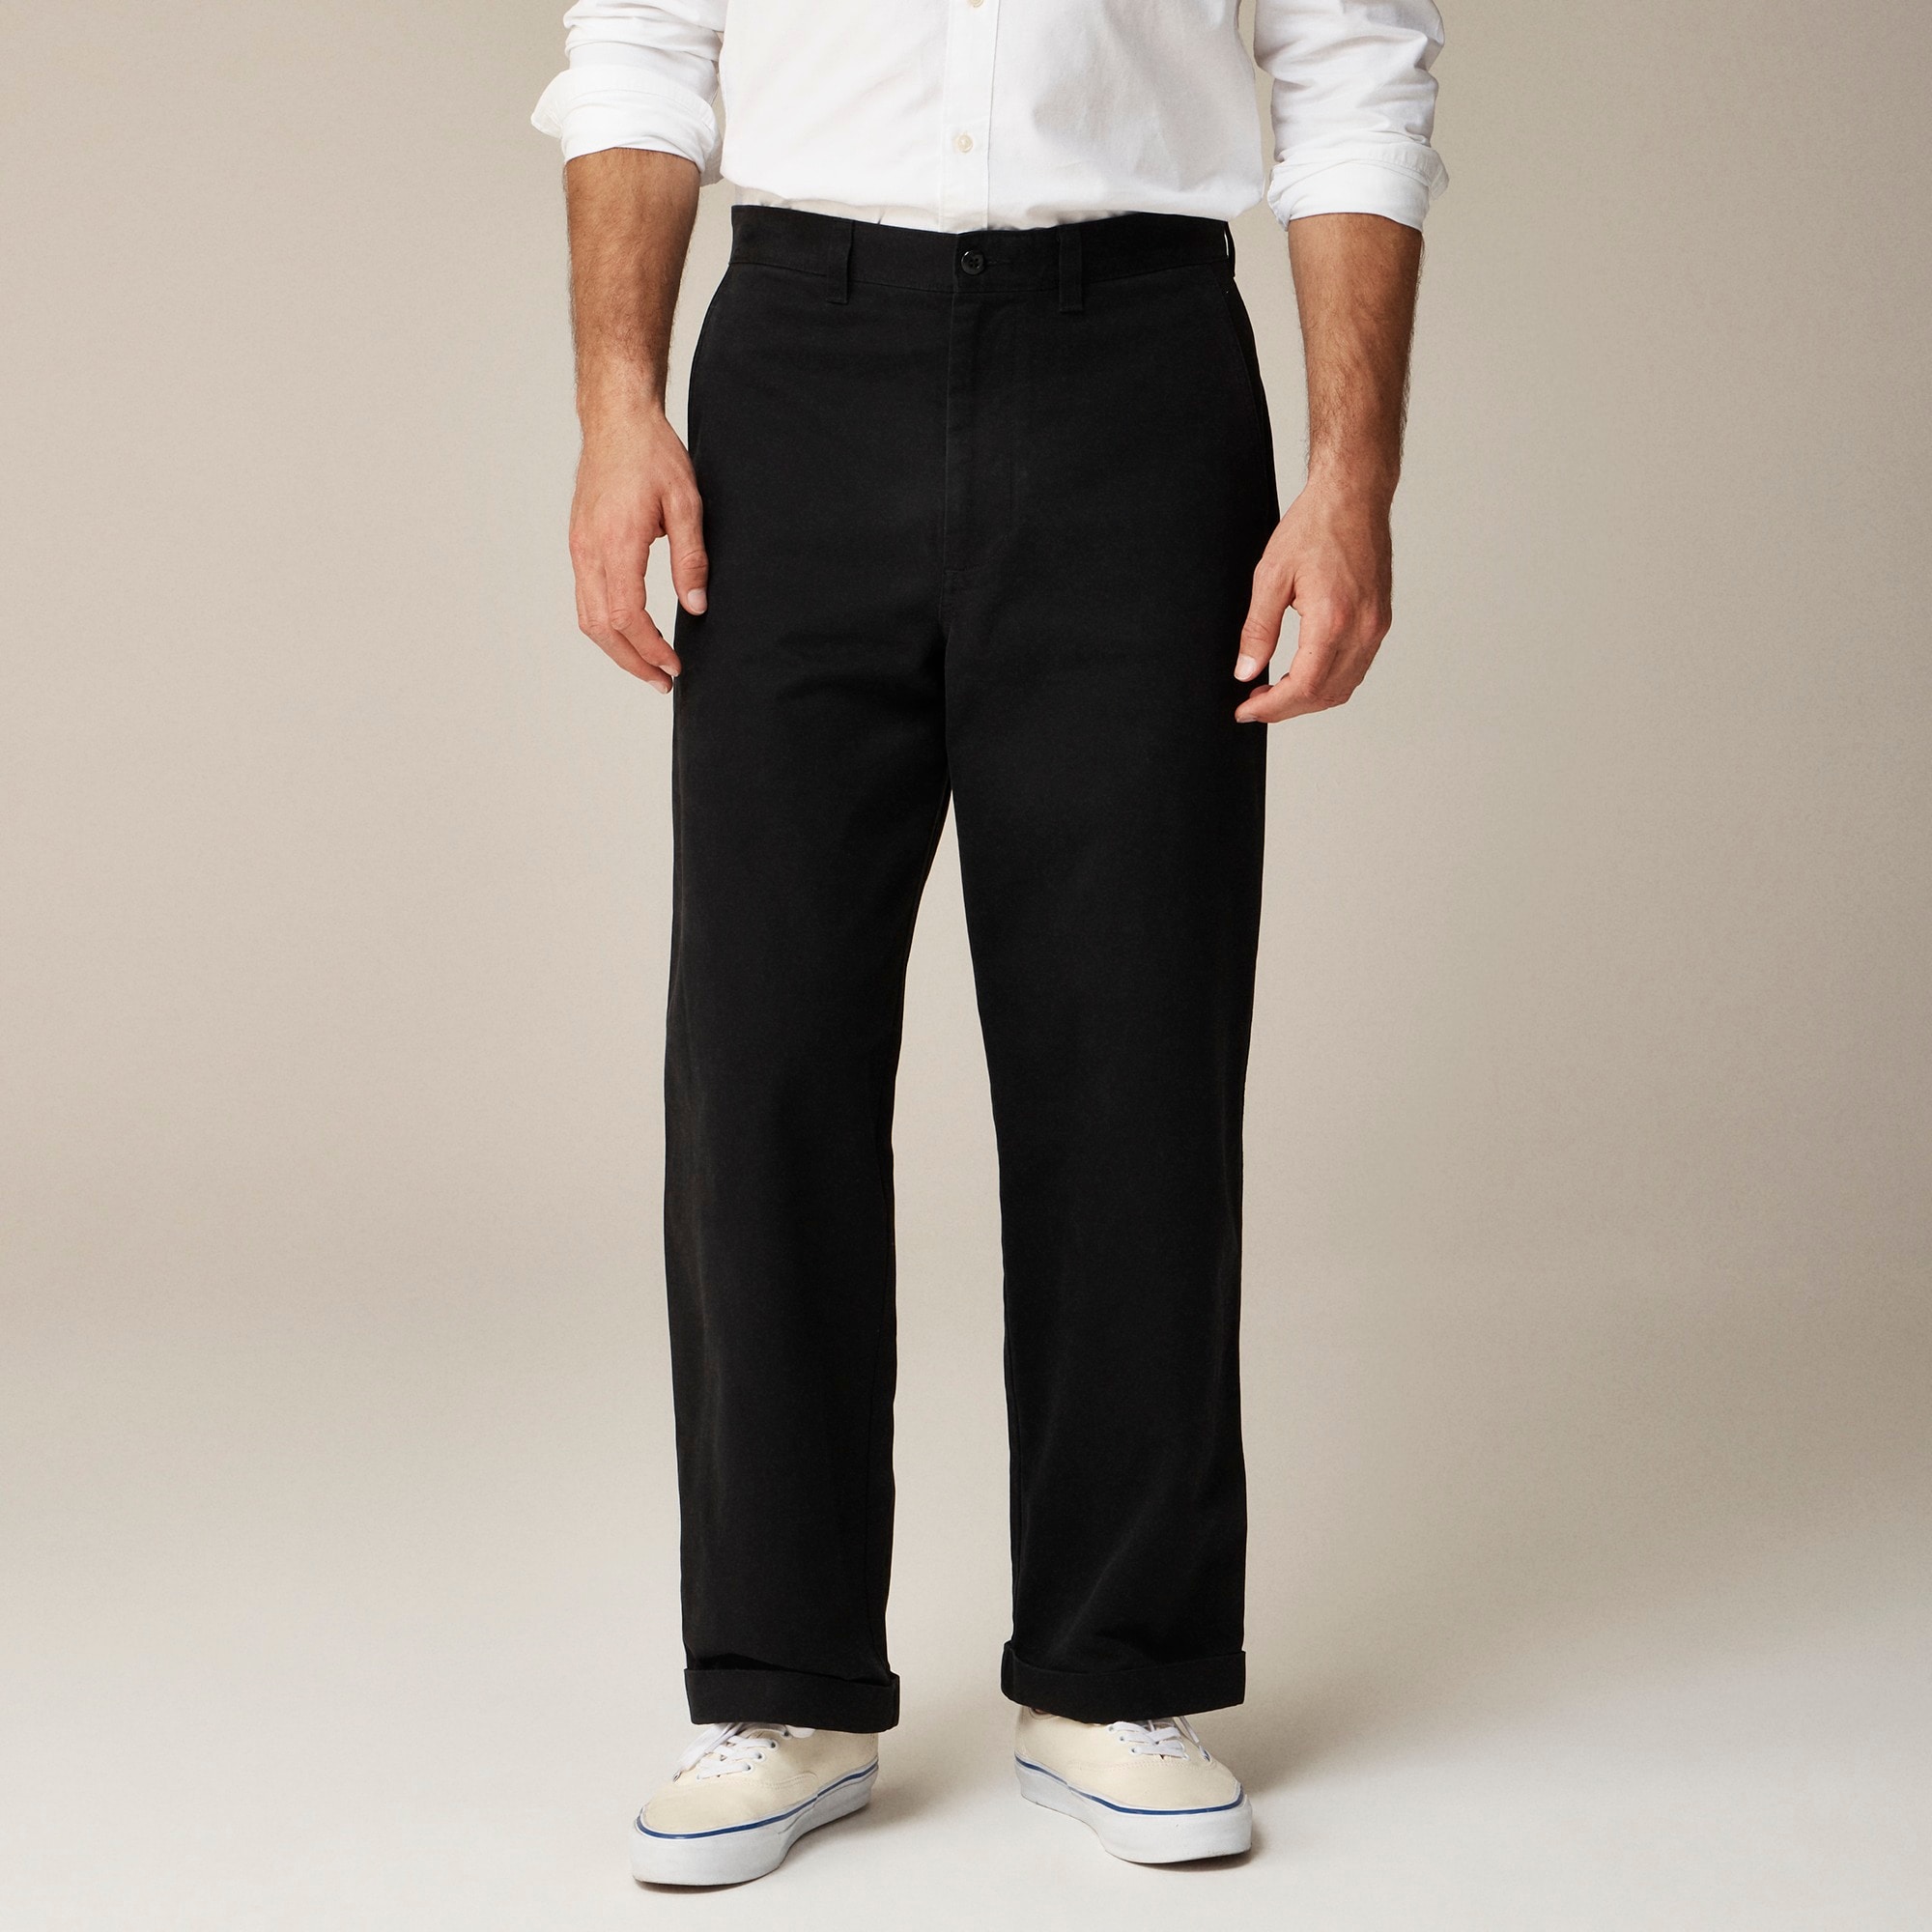 Jcrew Giant-fit chino pant